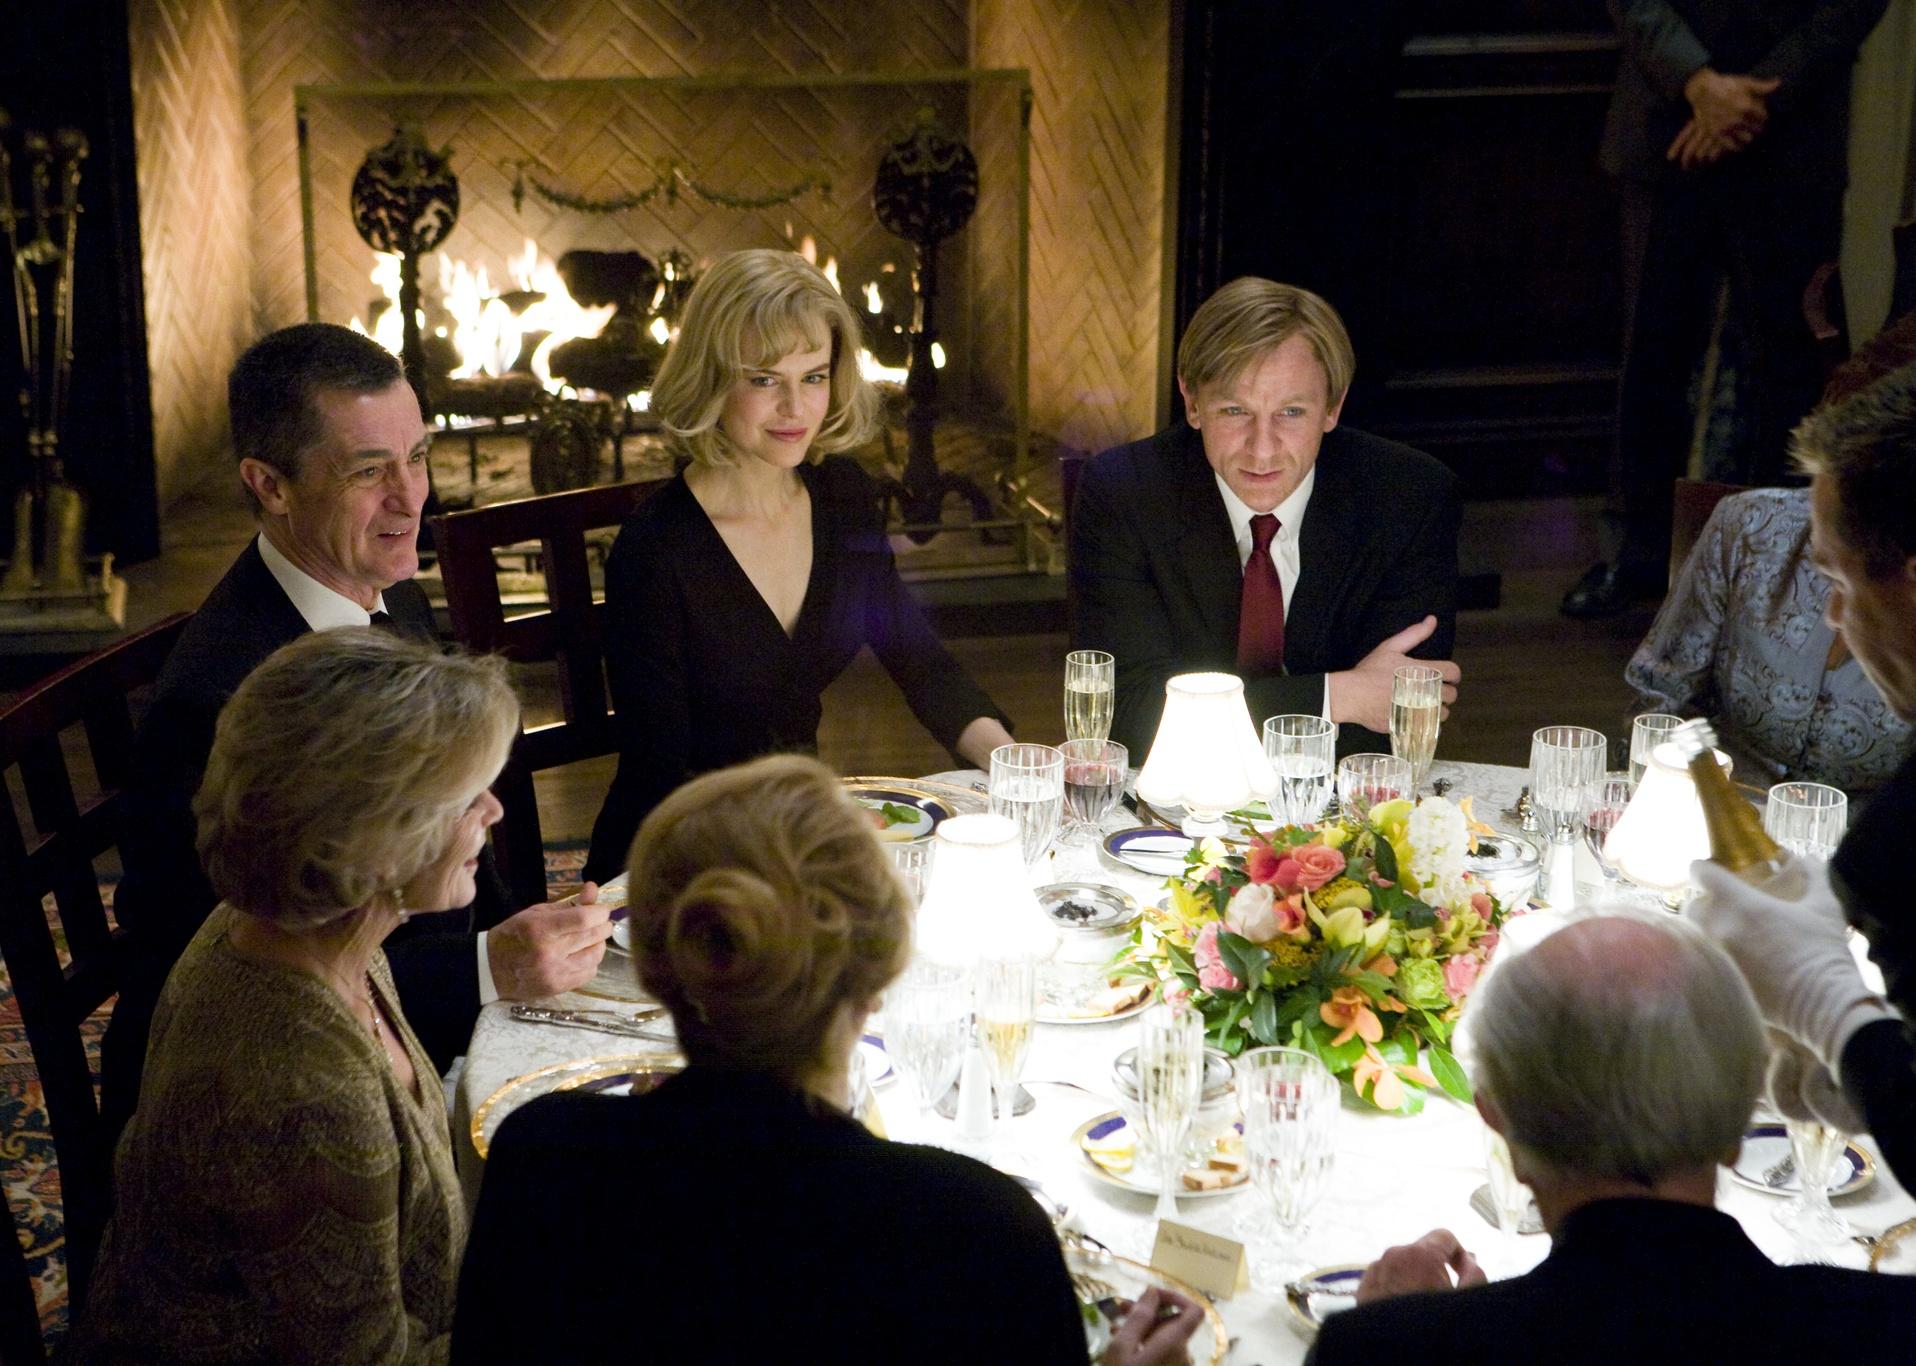 Nicole Kidman and Daniel Craig at a dining table set with flowers and fine china with a group in front of a fireplace.